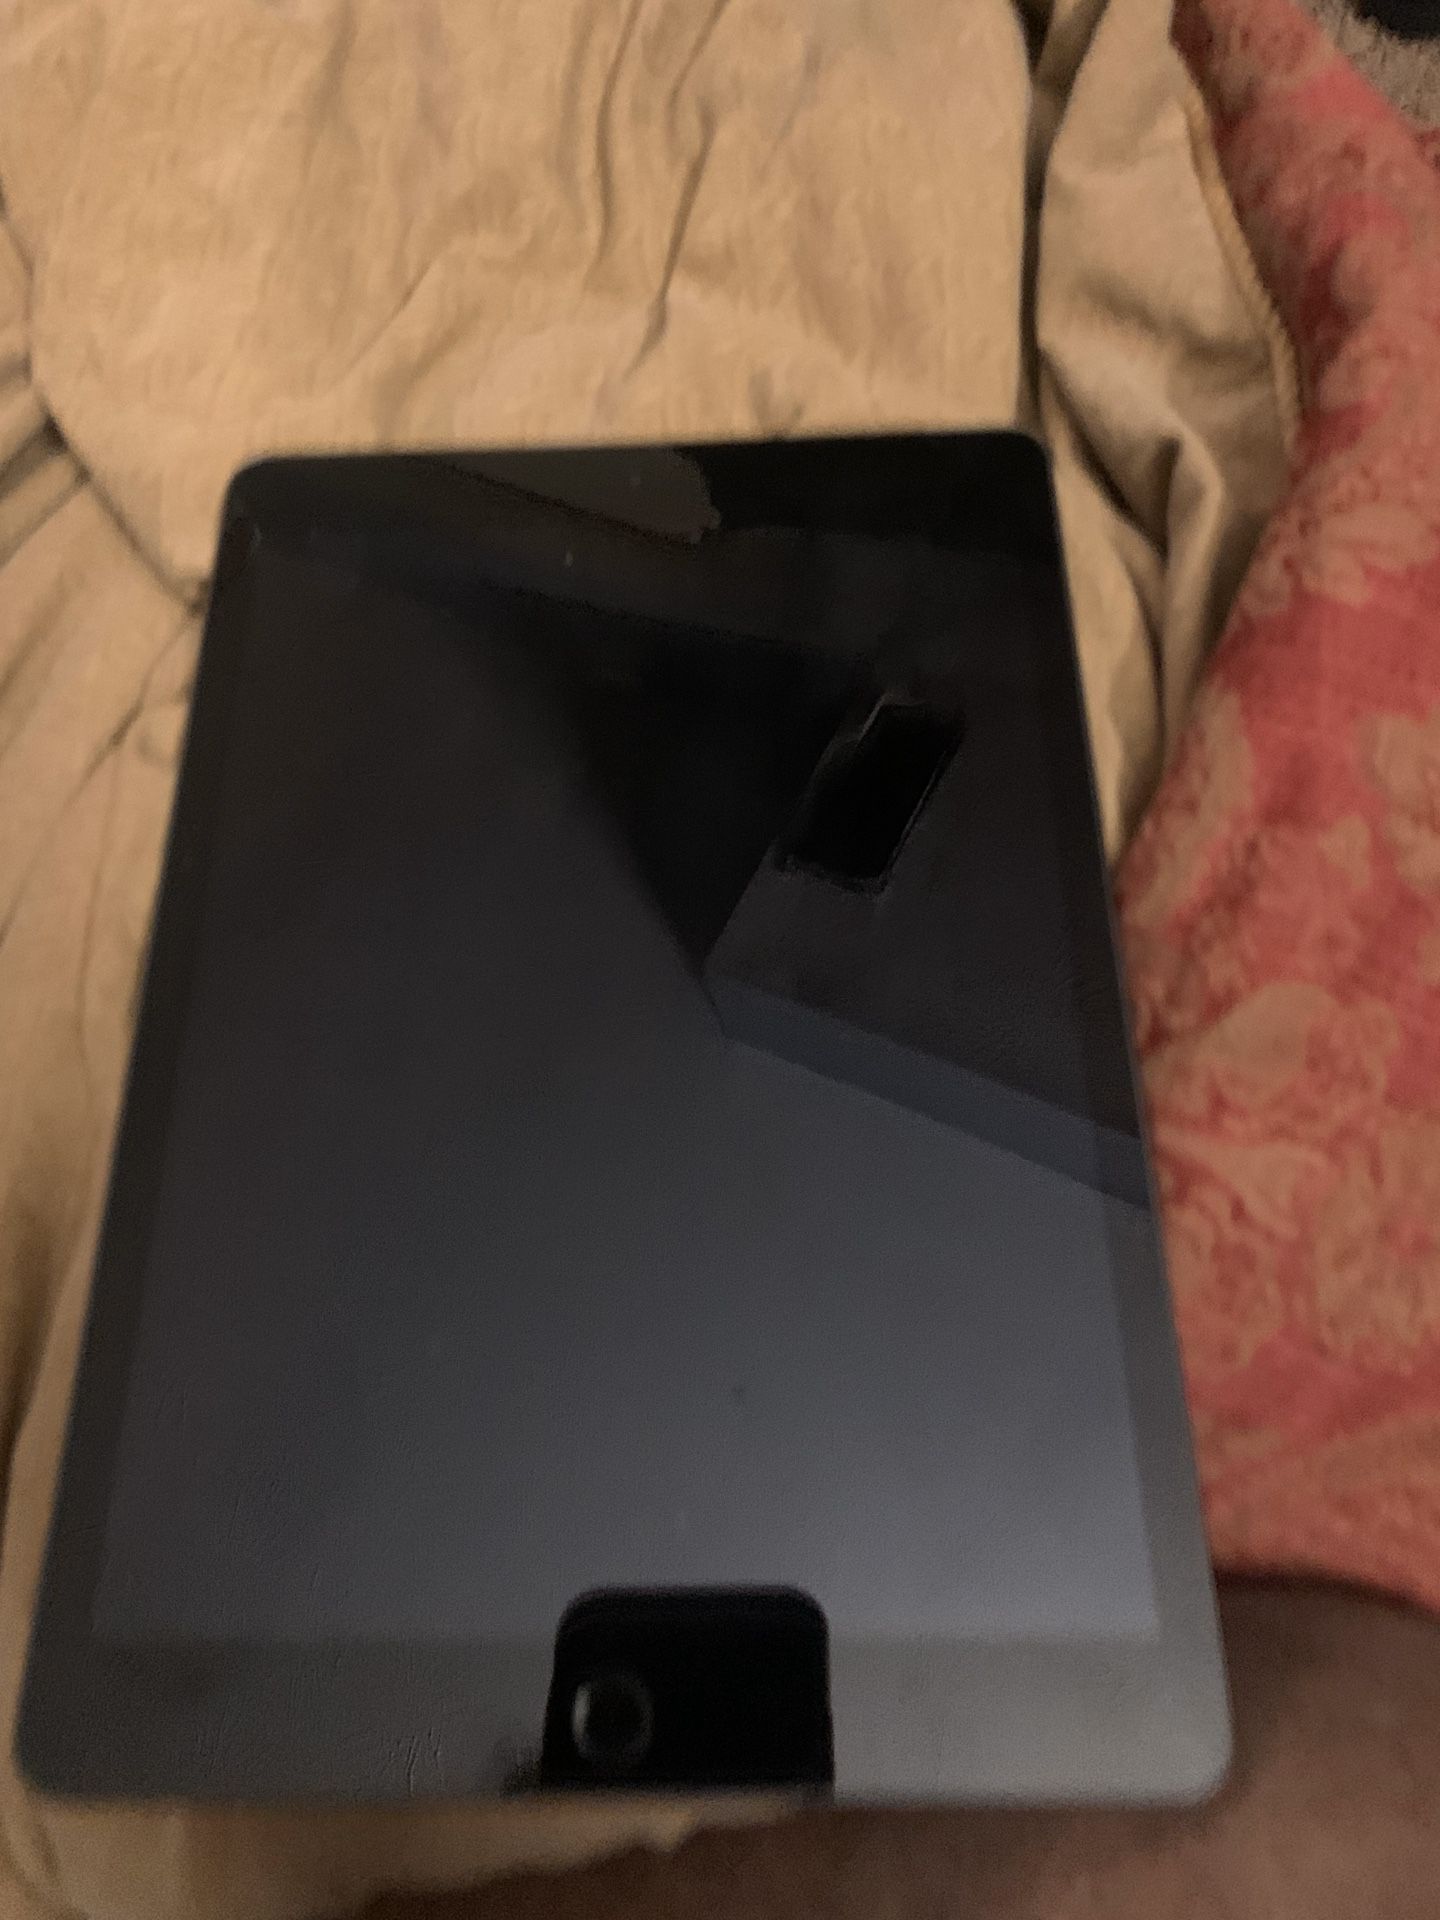 iPad 7 but will trade for a150cc scooter